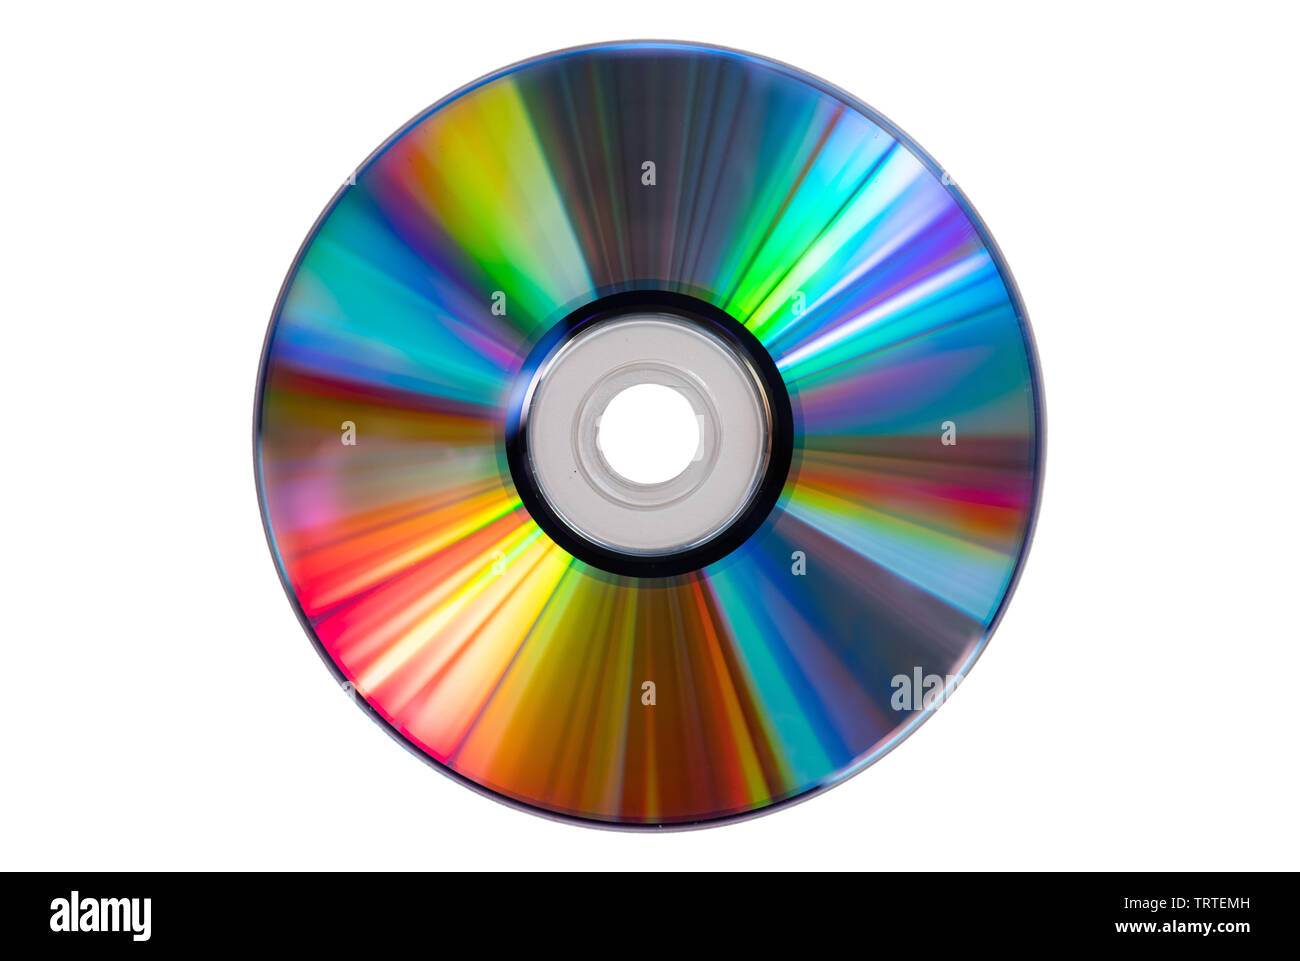 Vintage CD or DVD disk on white background, clipping path. Old circle discs used for data storage, share movies and music Stock Photo